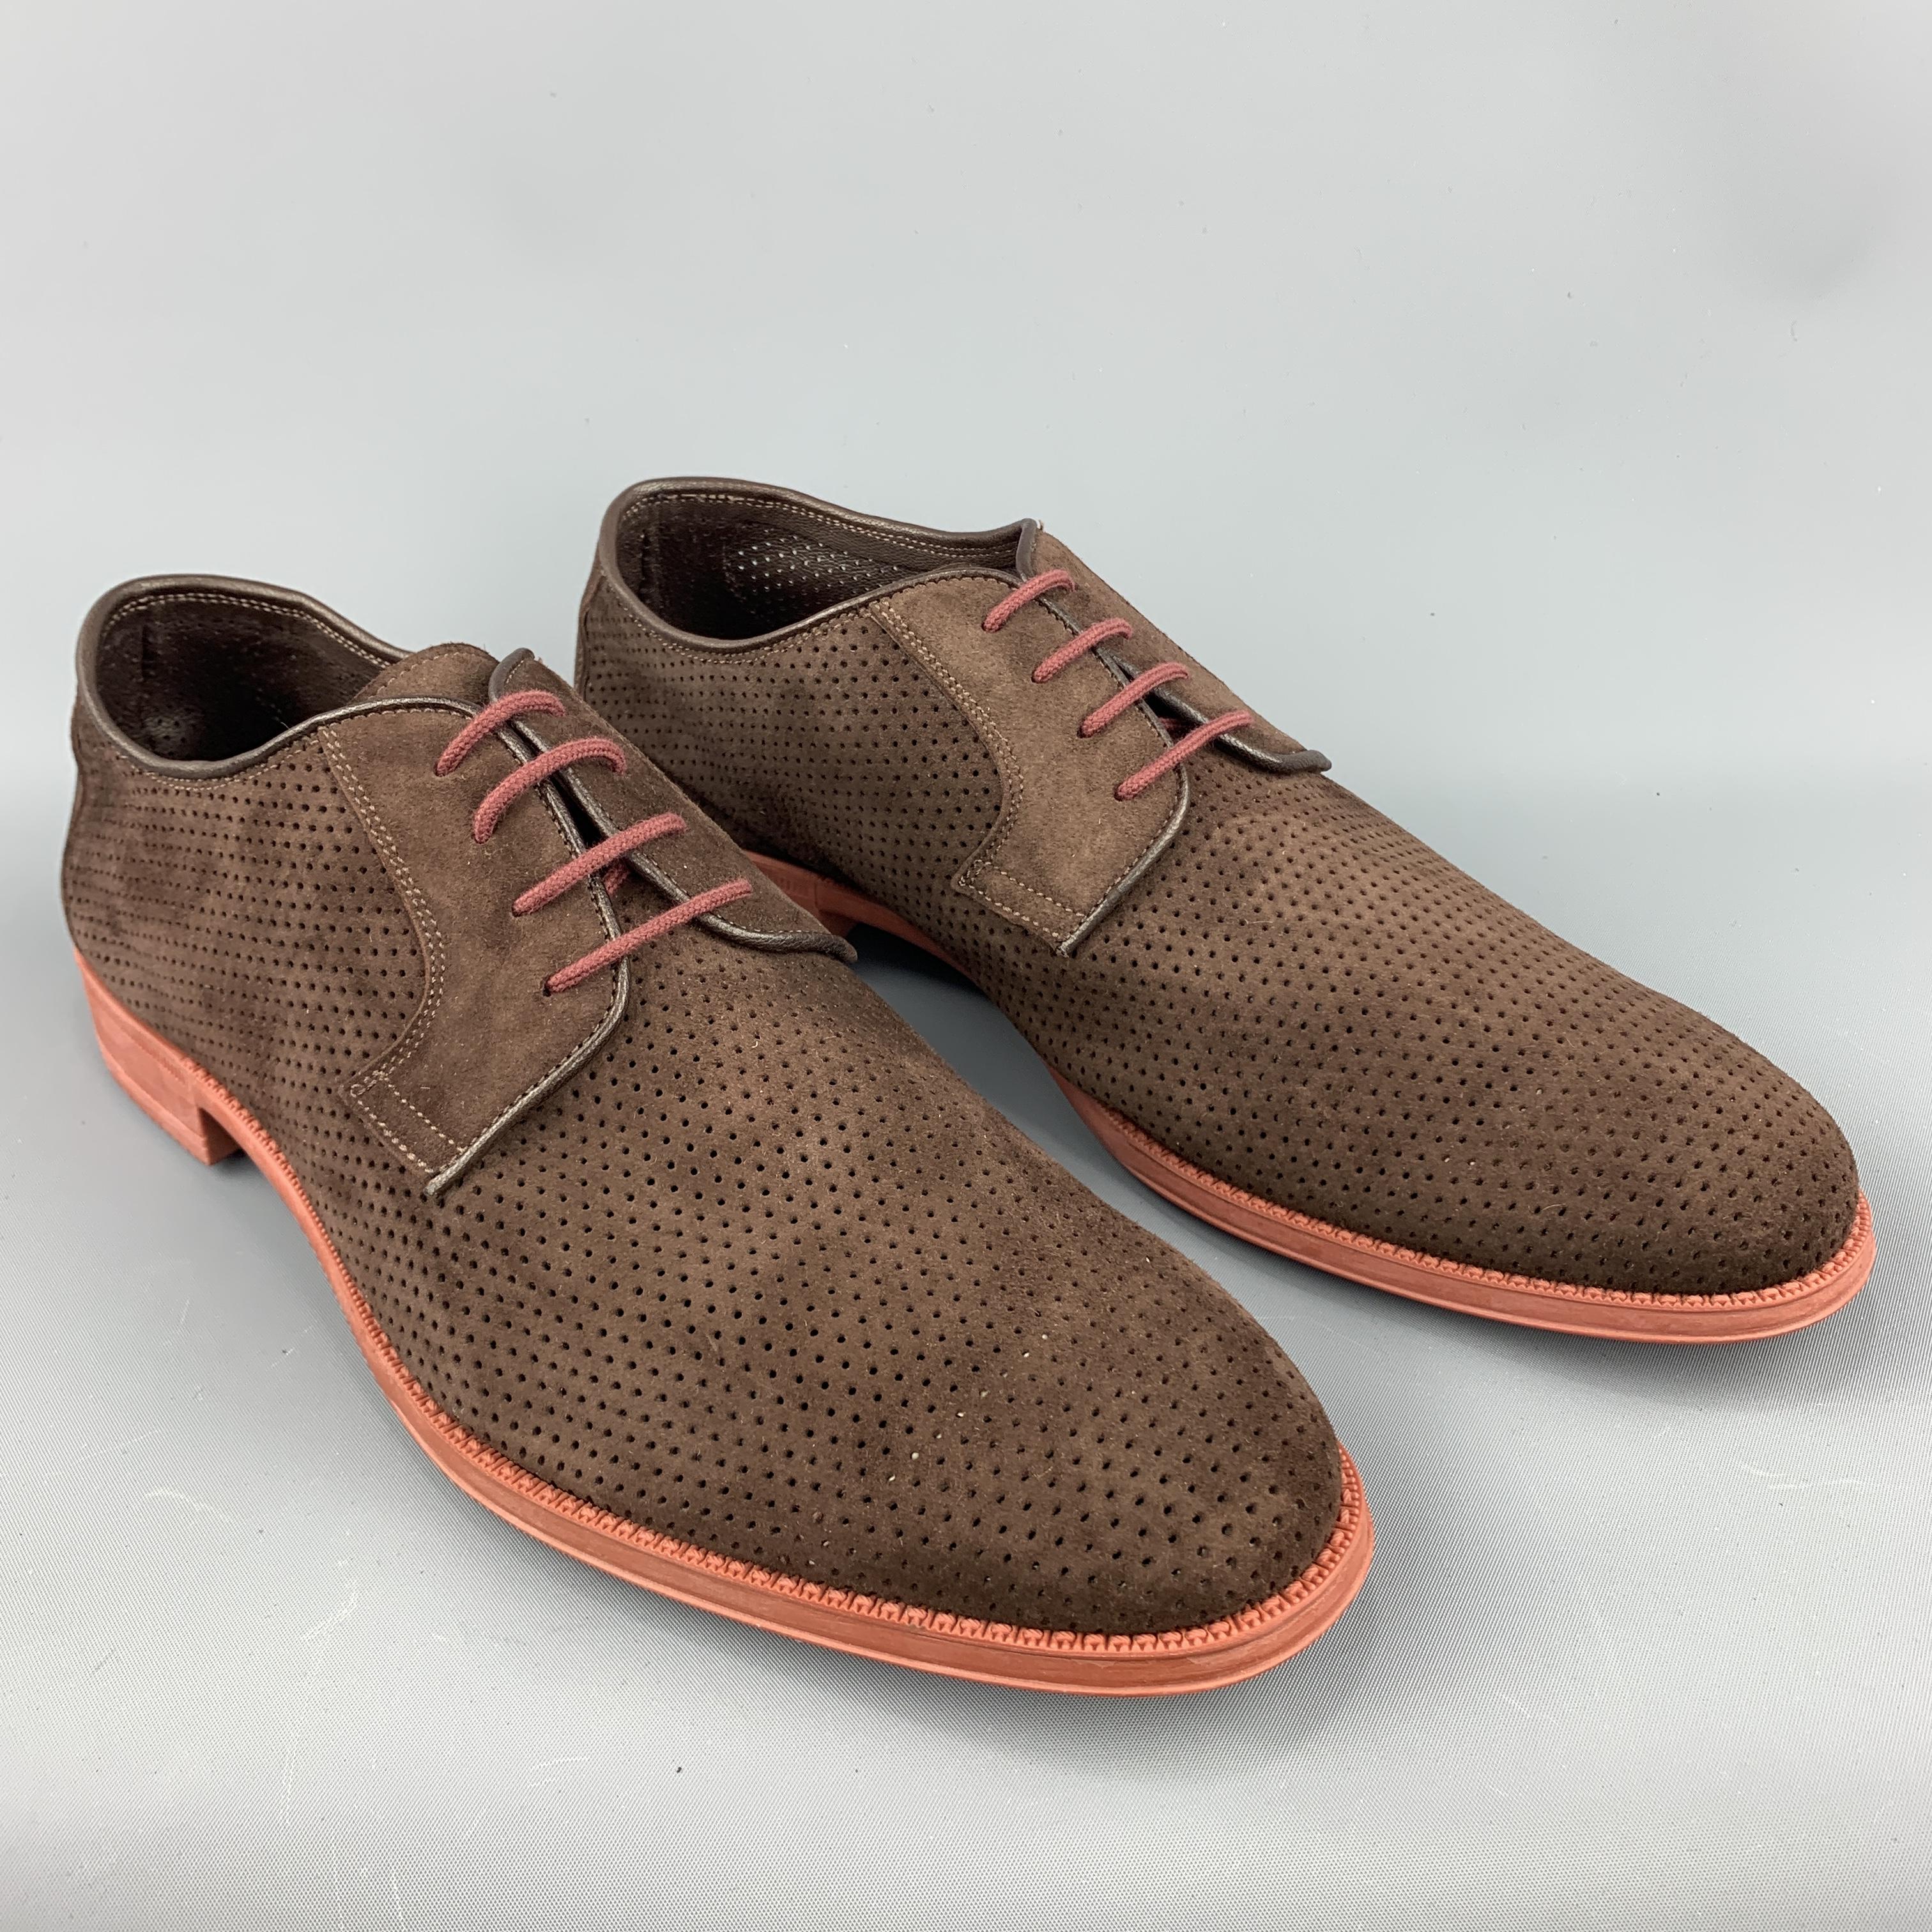 ANTONIO MAURIZI derbys come in brown perforated suede with a rubber sole. With box. Made in Italy.
 
Excellent Pre-Owned Condition.
Marked: IT 46
 
Outsole: 12.5 x  4.25 in.